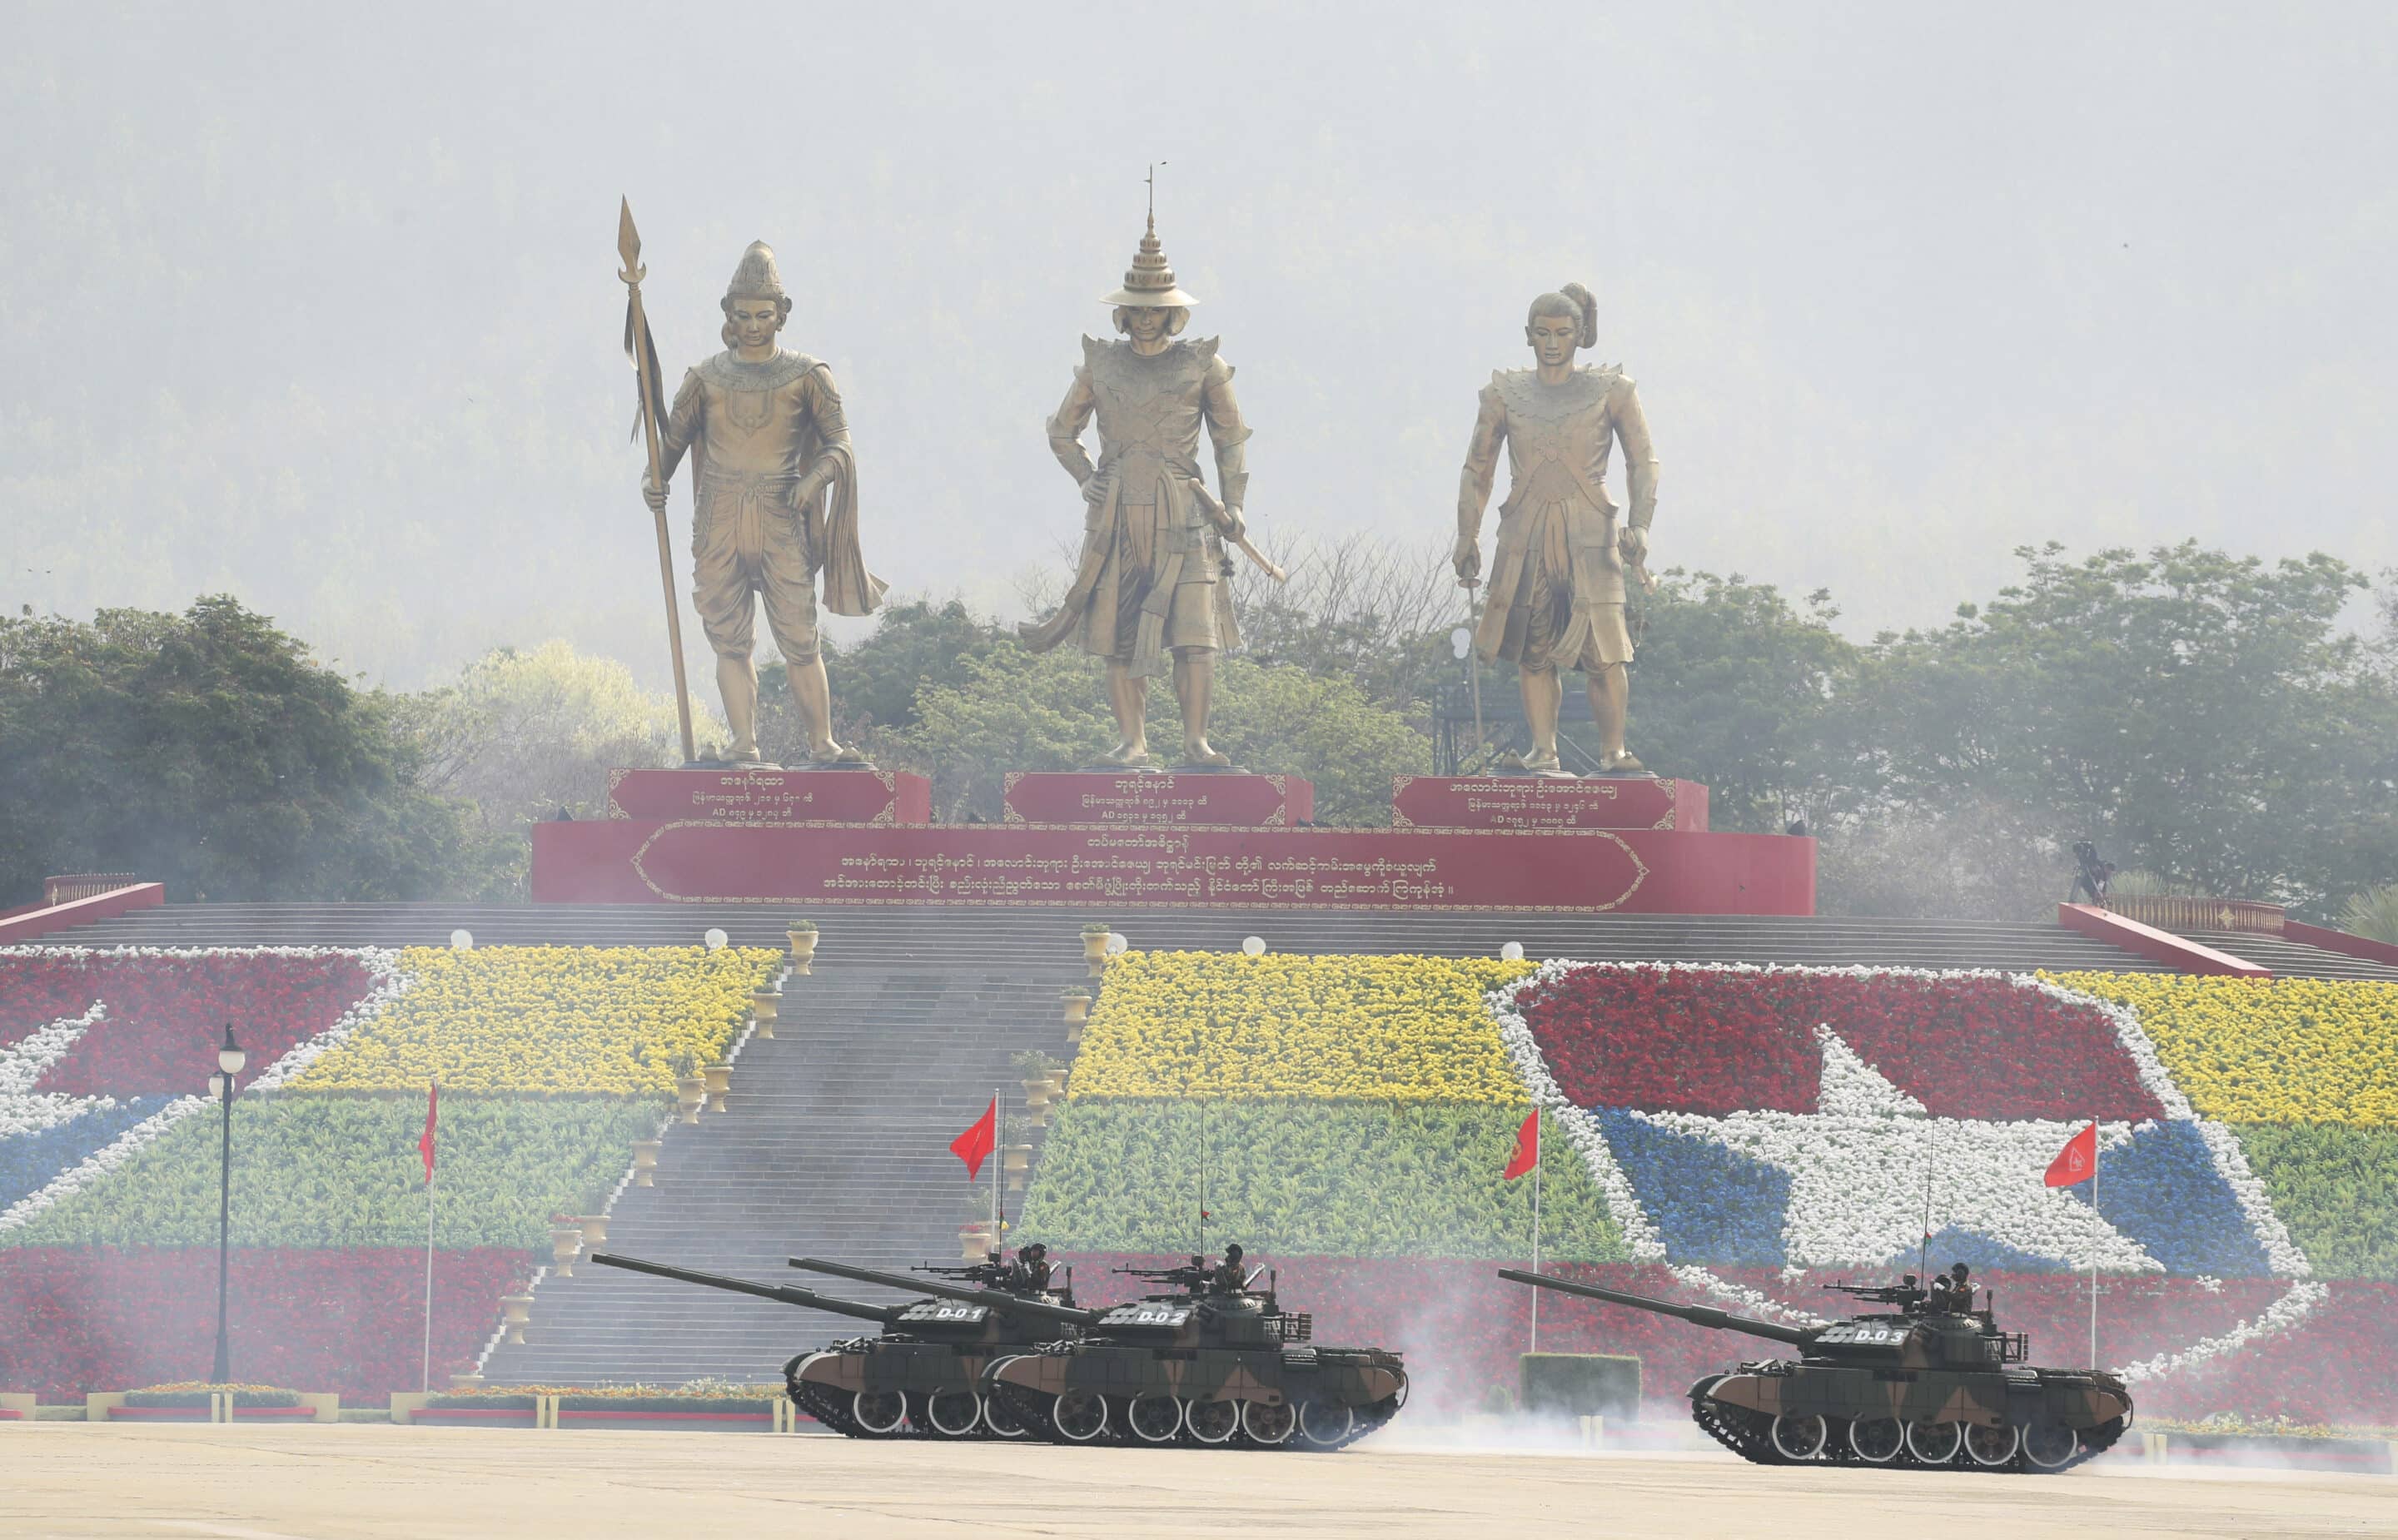 Myanmar military tanks are driven during a parade to commemorate Myanmar's 77th Armed Forces Day in Naypyitaw, Myanmar, Sunday, March 27, 2022. (AP Photo/Aung Shine Oo)/XAS111/22086198075046//2203270743